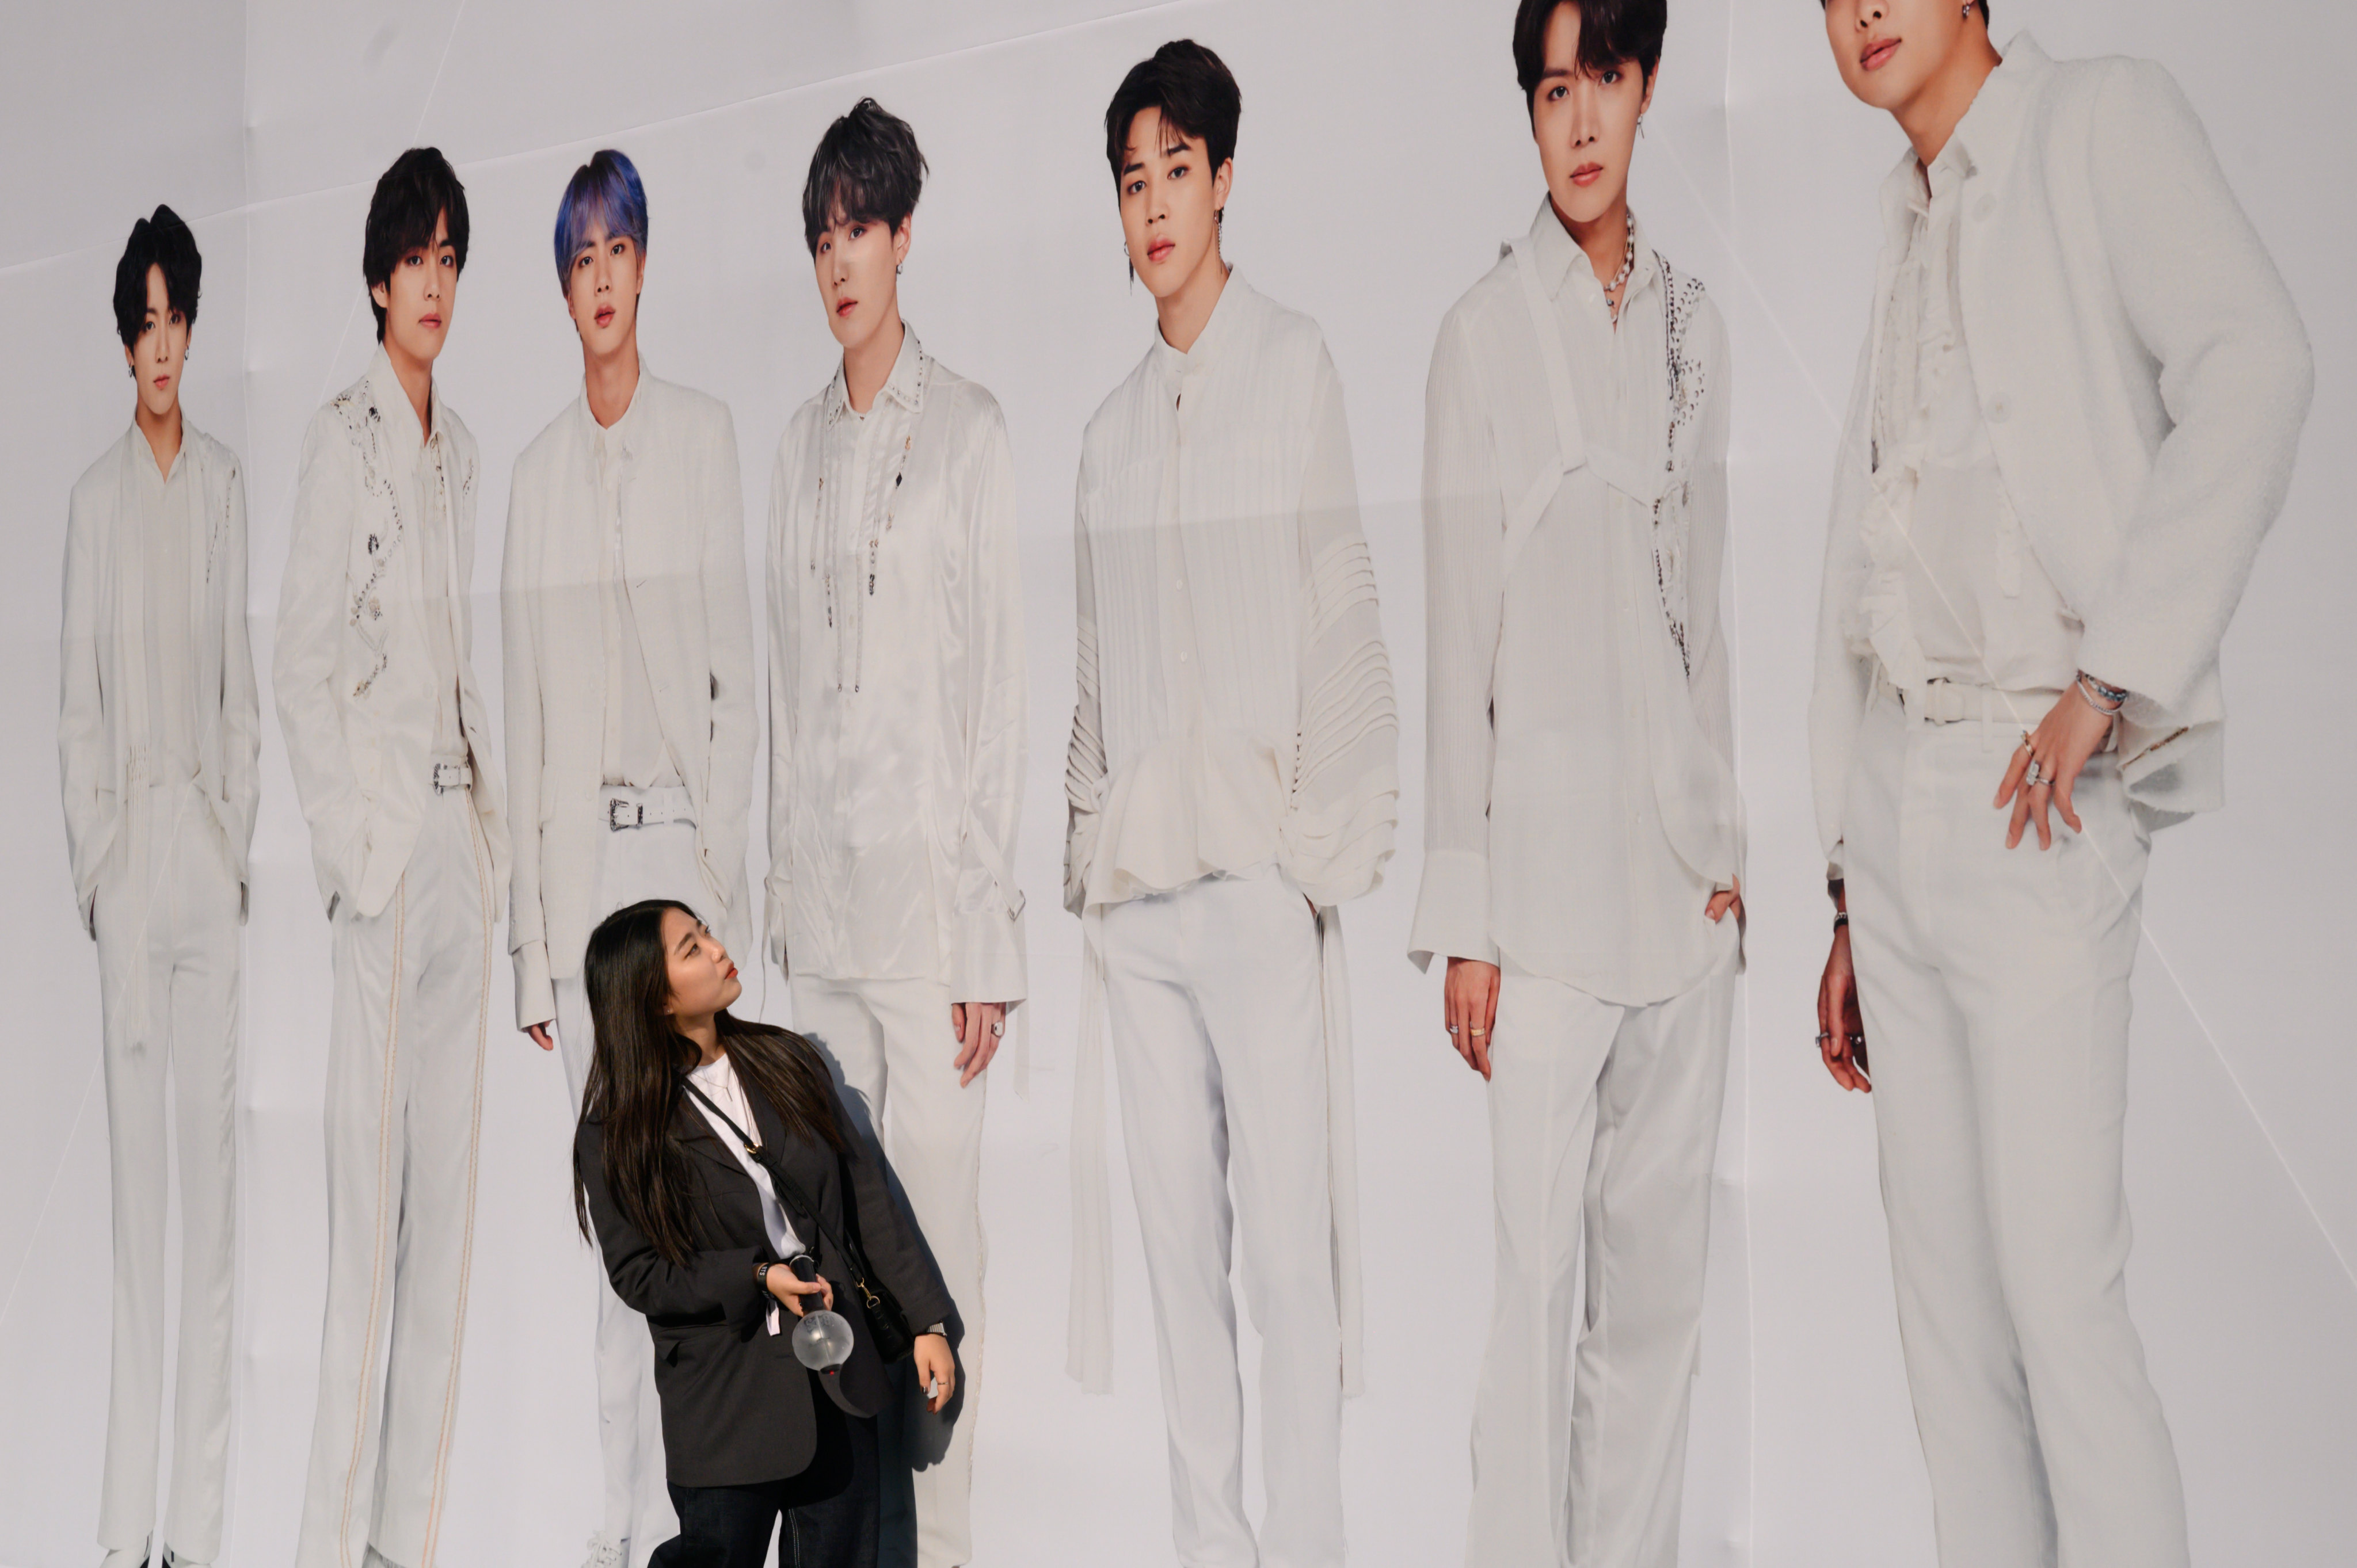 A fan of K-pop group BTS stands against a backdrop featuring an image of the band members as they arrive for the final concert of their world tour at the Olympic stadium in Seoul on October 29, 2019. The tour drew a total audience of more than 2 million at 62 shows in 23 cities, according to Big Hit Entertainment. Photo: AFP